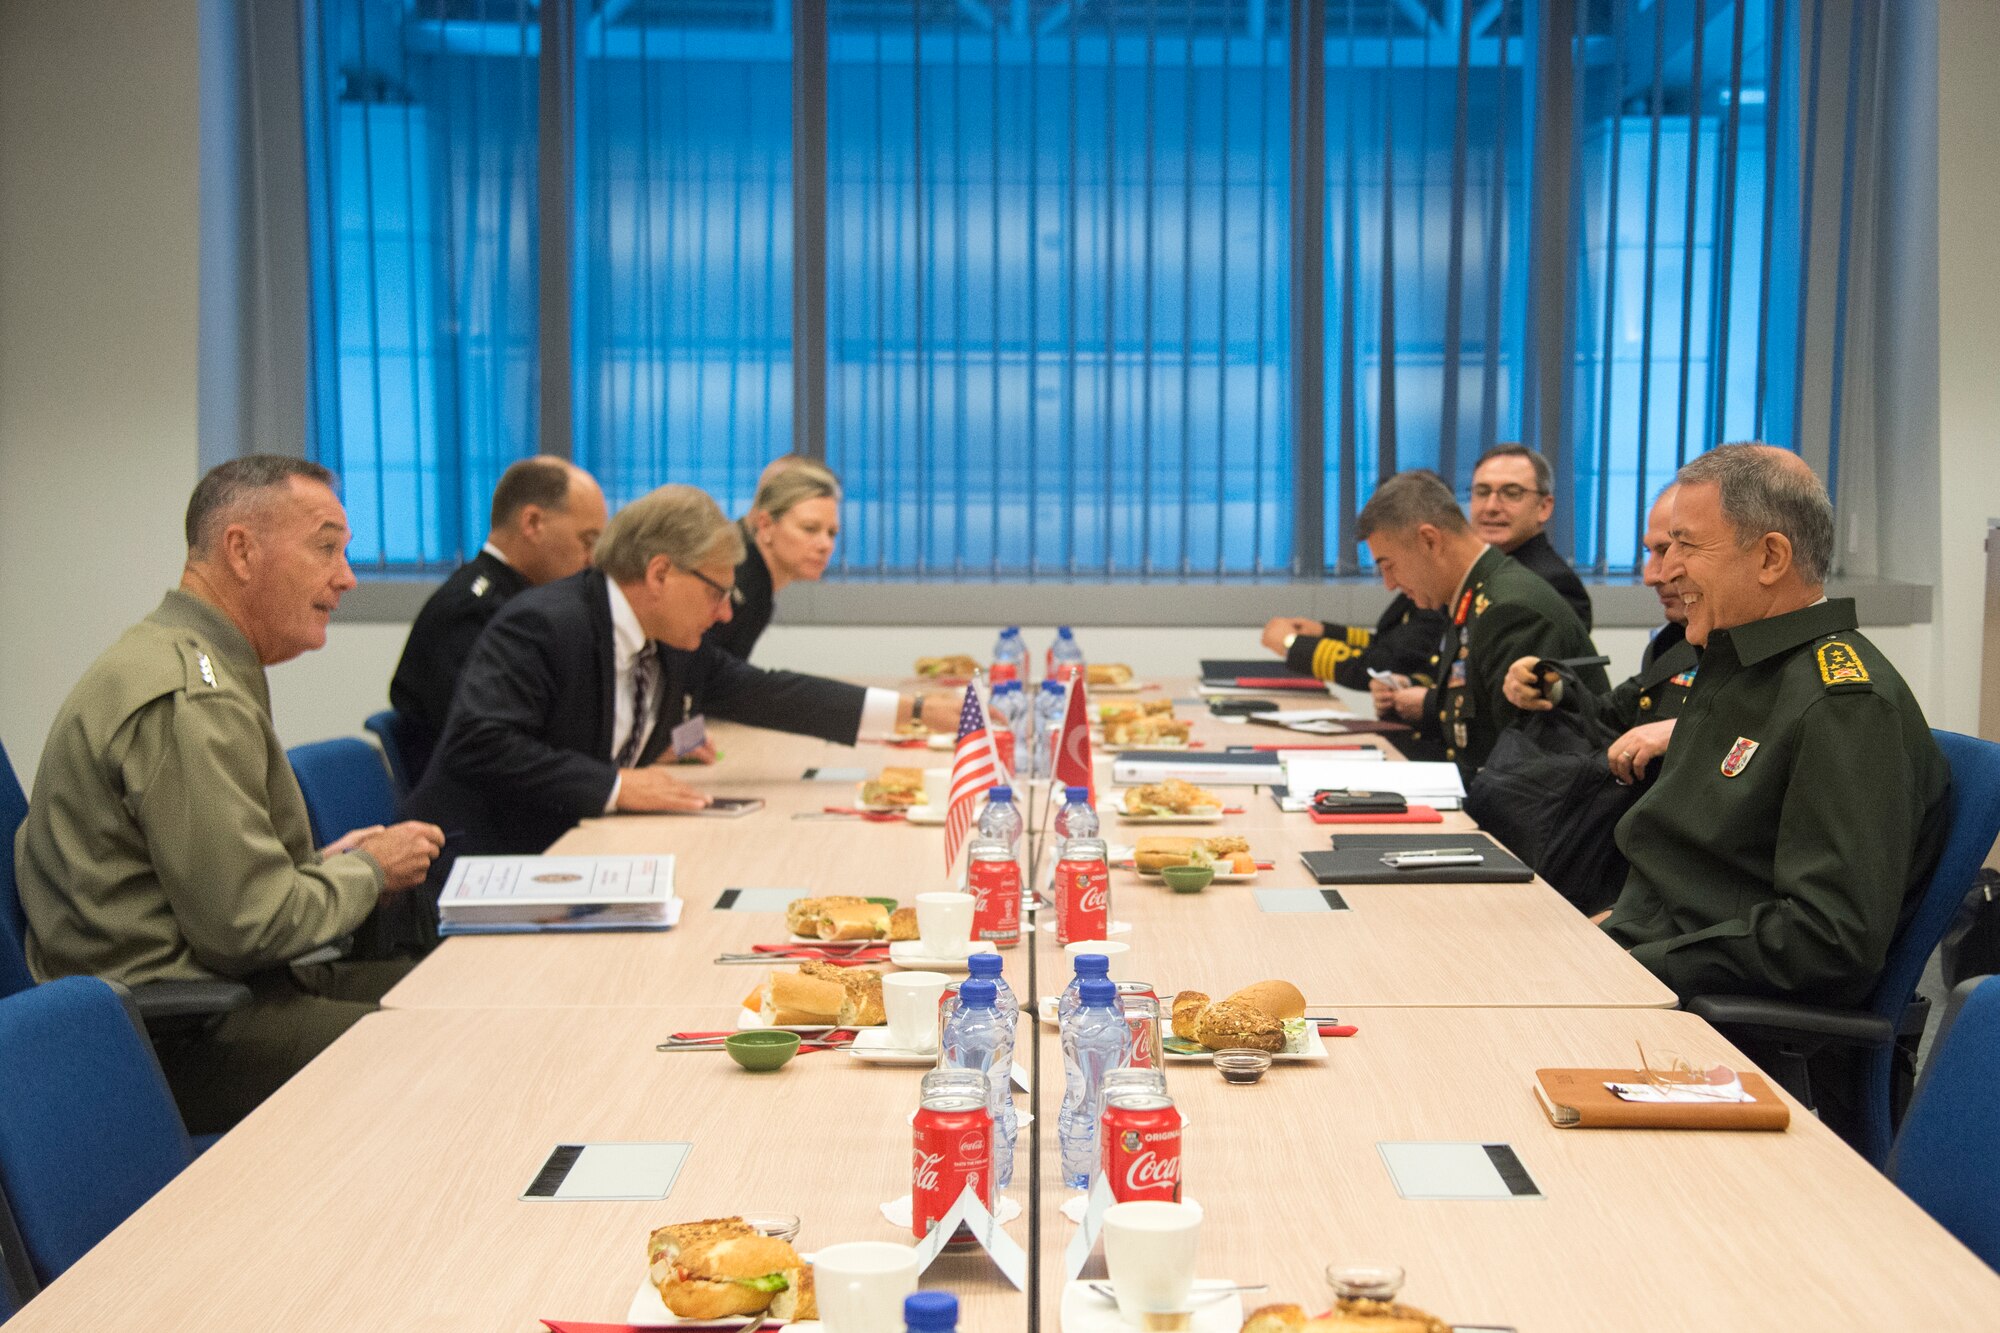 Chairman of the Joint Chiefs of Staff Gen. Joseph F. Dunford, Jr., meets with Chief of the Turkish General Staff General Hulusi Akar in Brussels, Belgium, May 16, 2018.